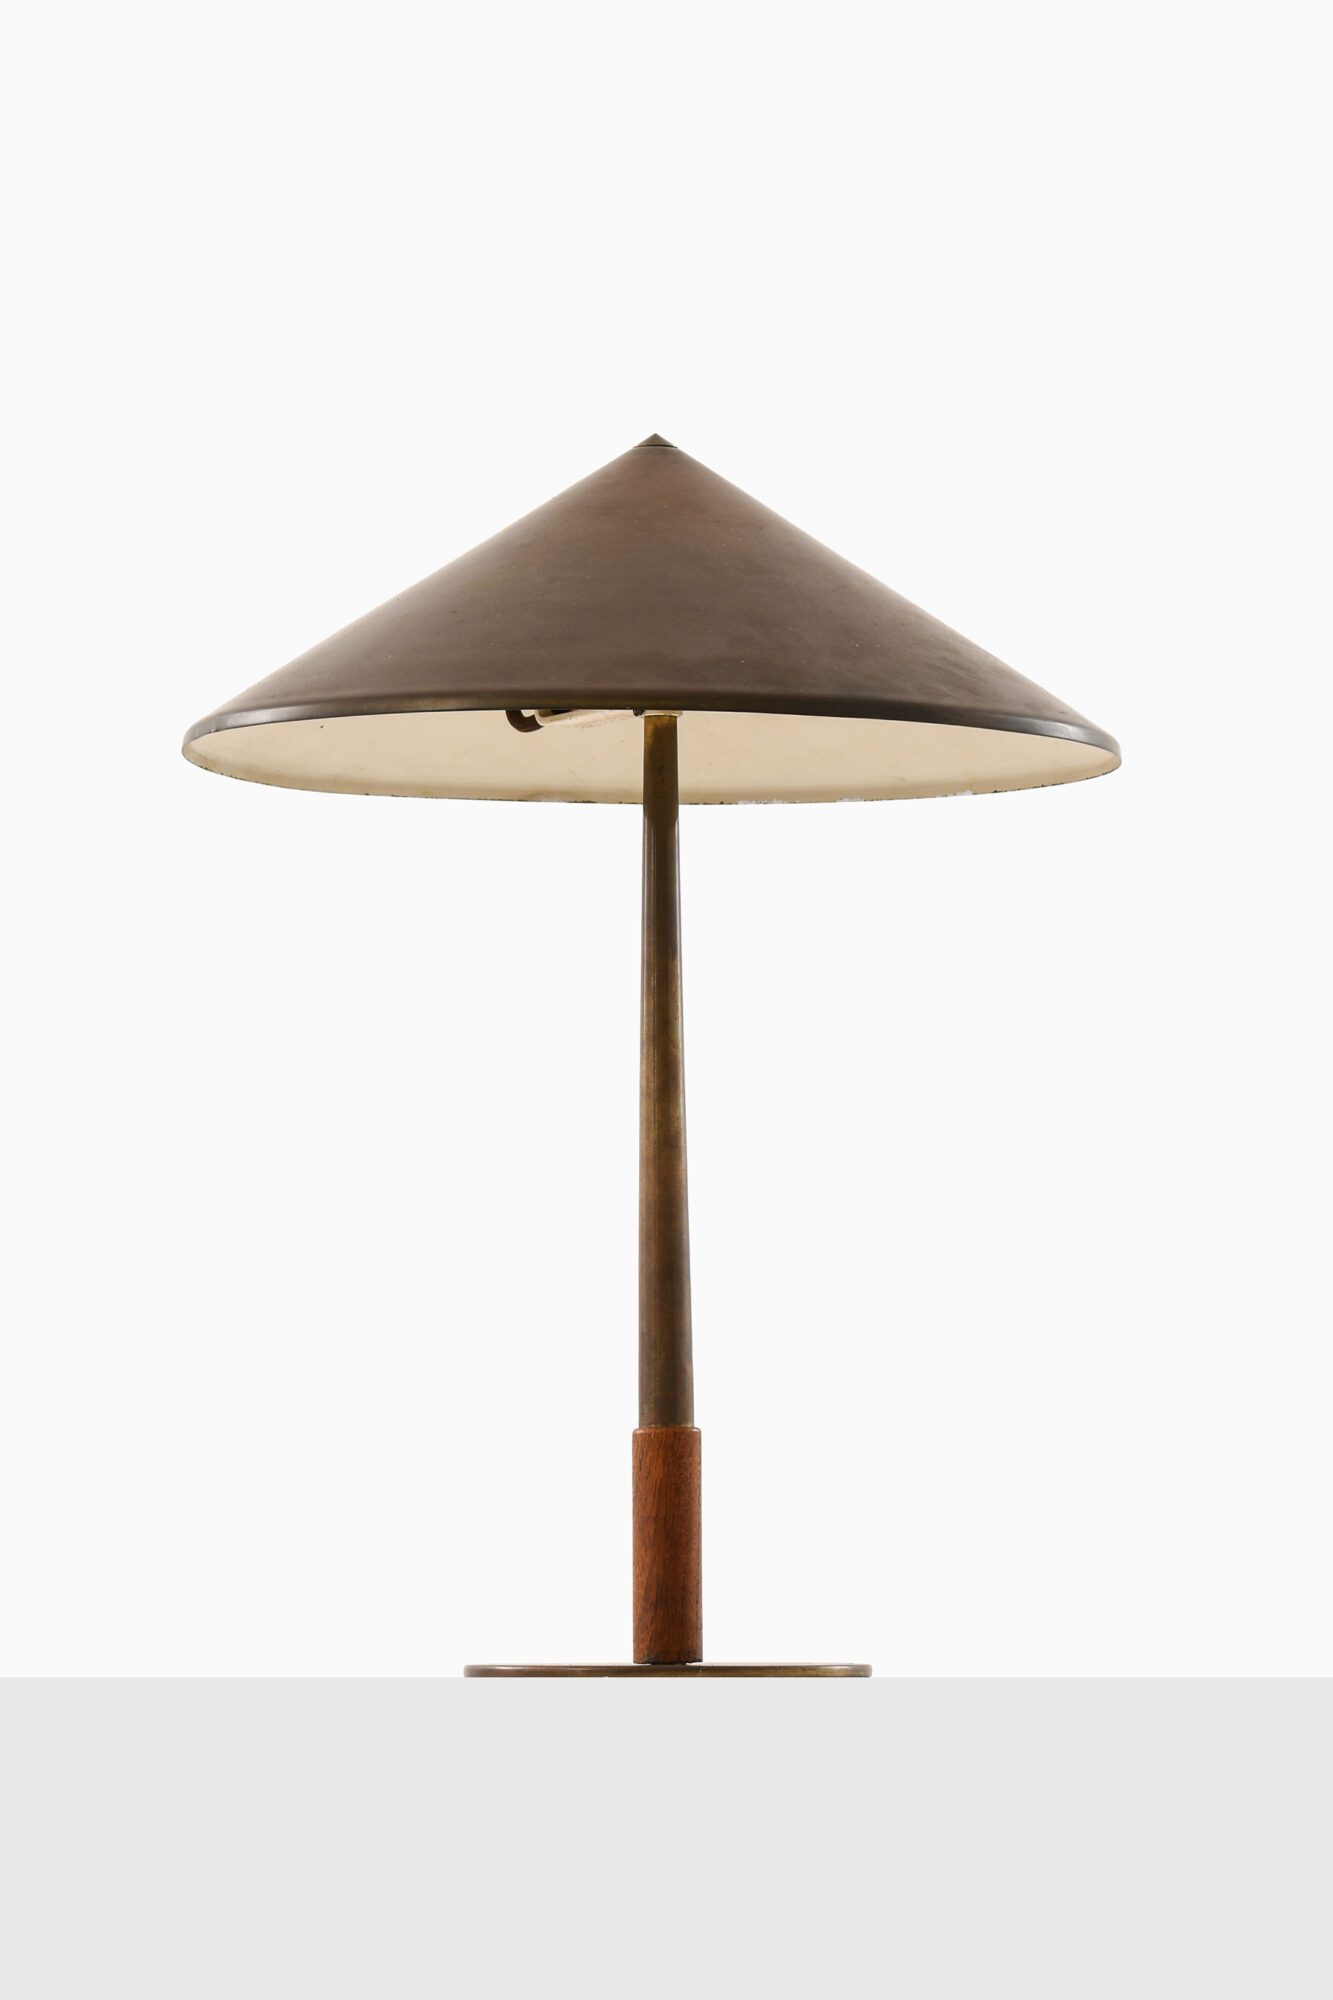 Bent Karlby table lamp by Lyfa at Studio Schalling